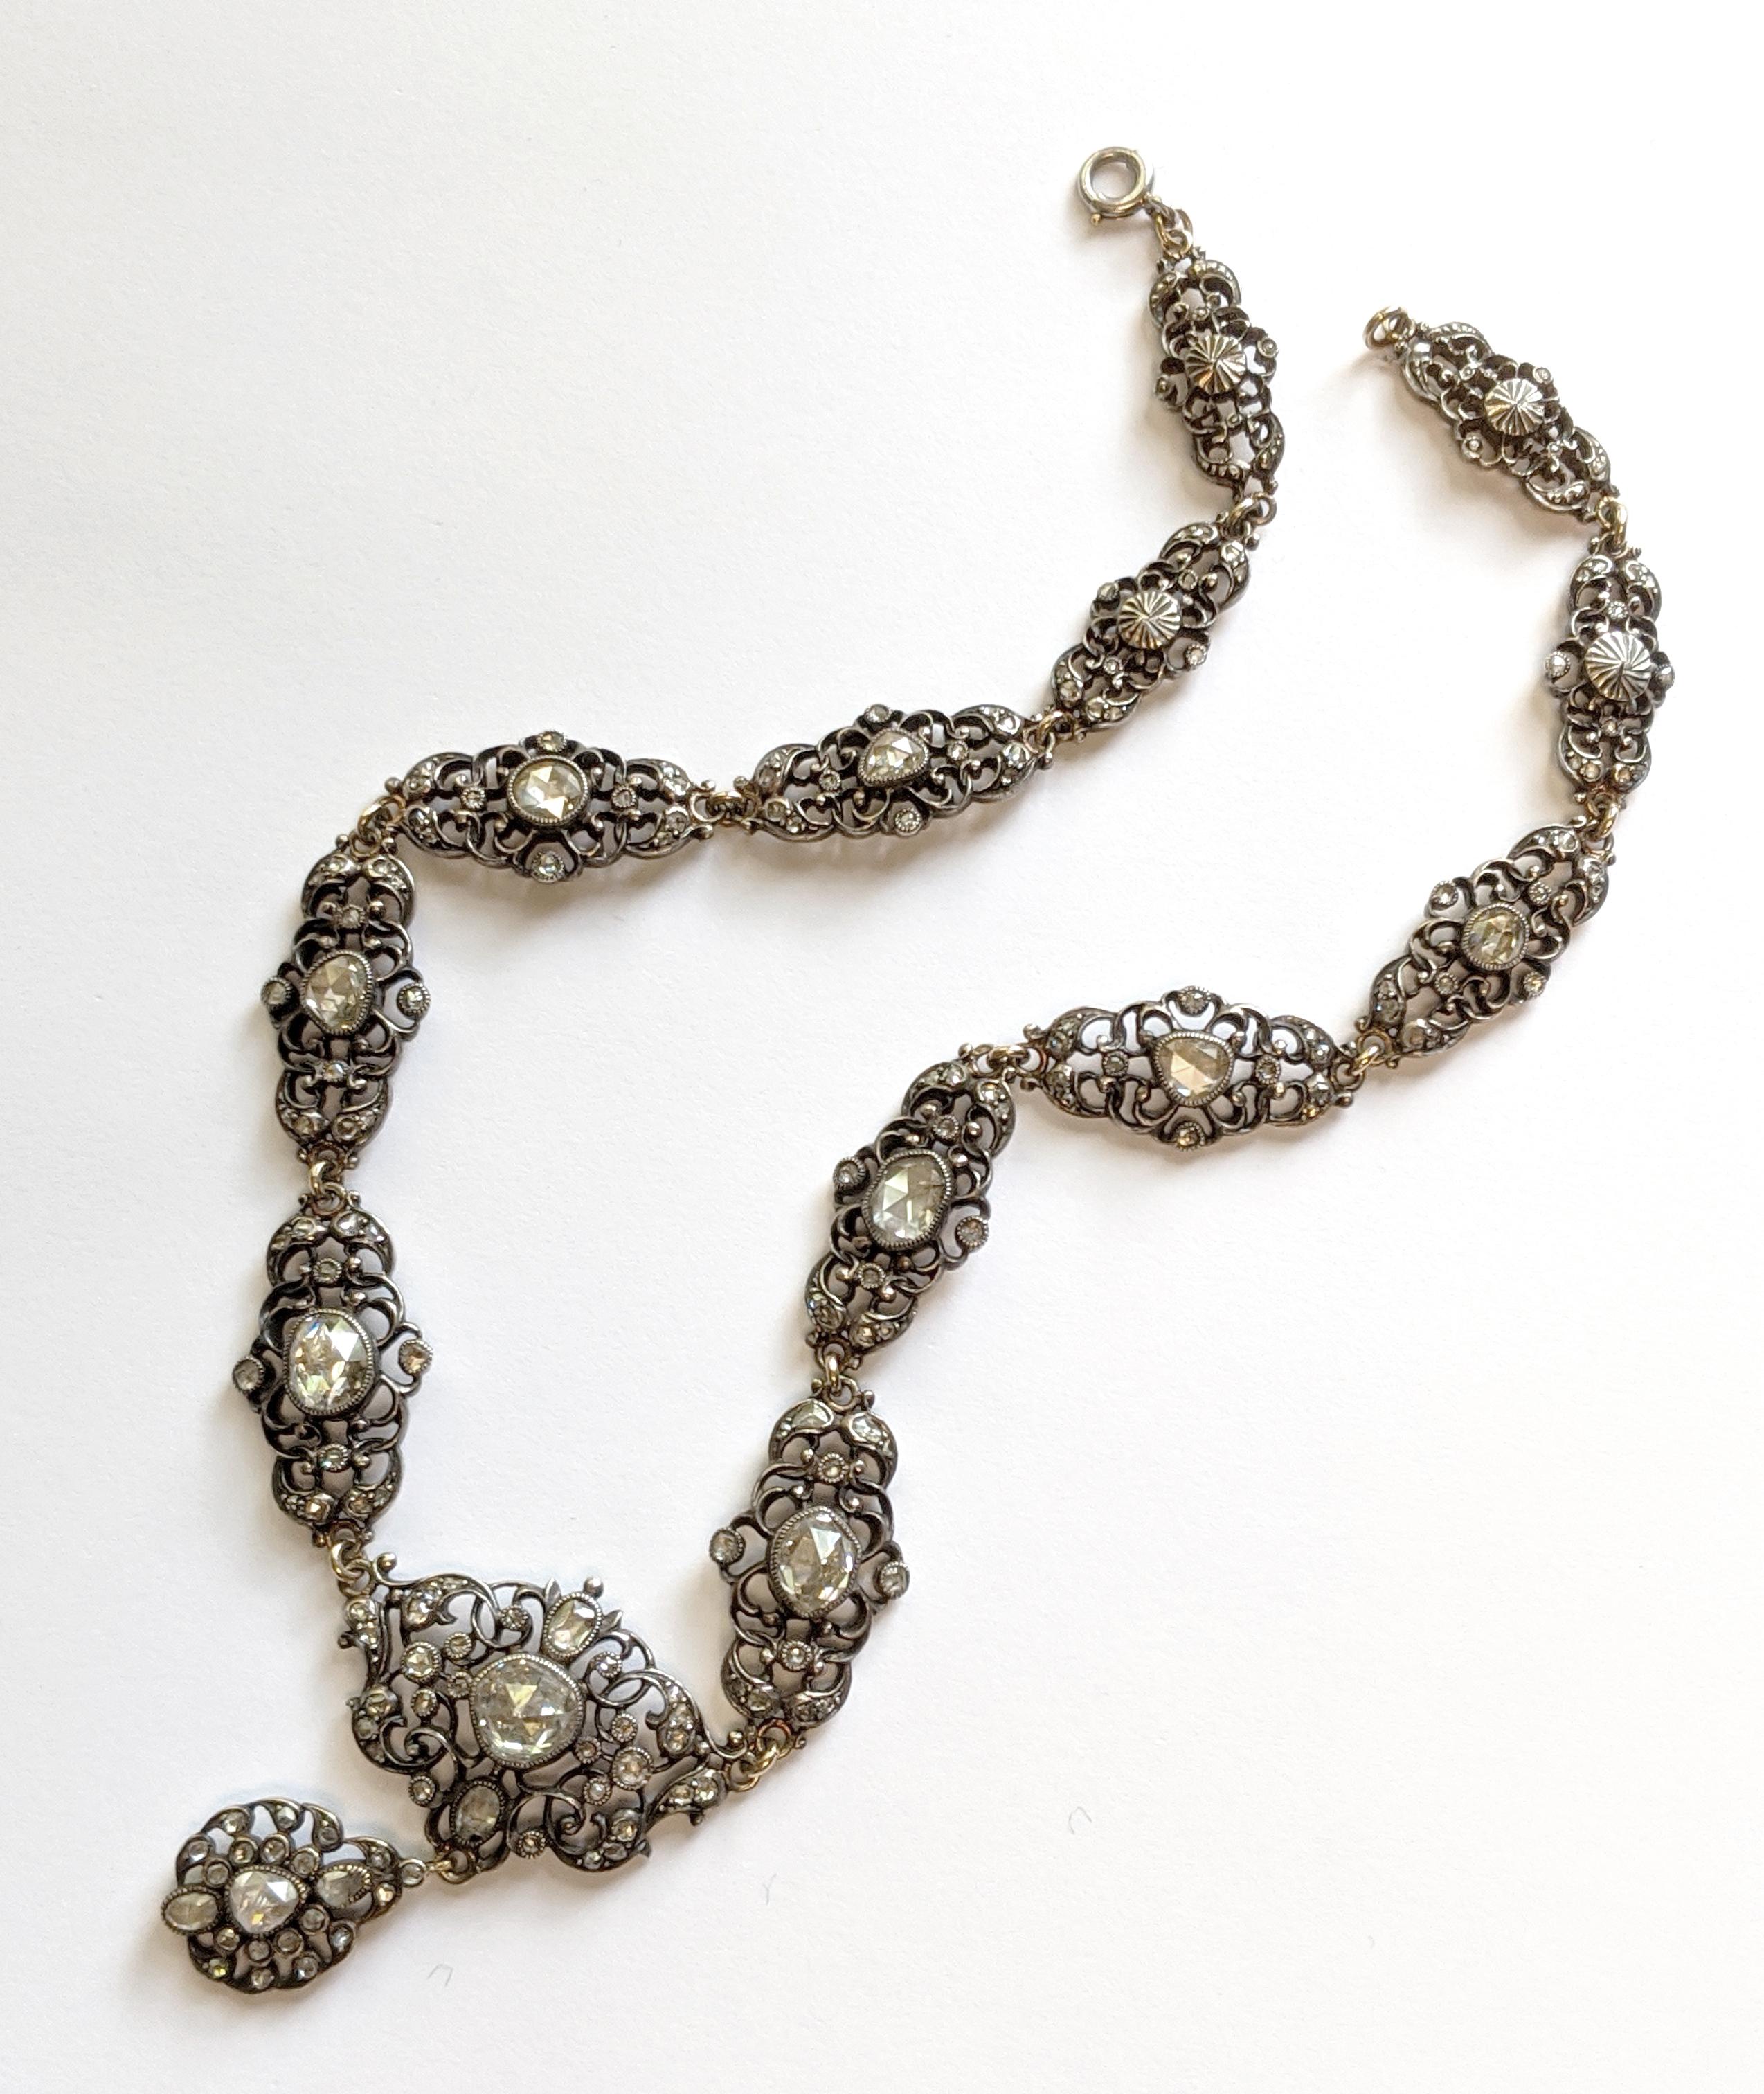 One silver over 18 K yellow gold Georgian-style necklace containing approximately 203 rose cut diamonds weighing approximately 6.17 carats in total. The necklace measures 15 inches in length and is finished with a platinum spring ring. The necklace